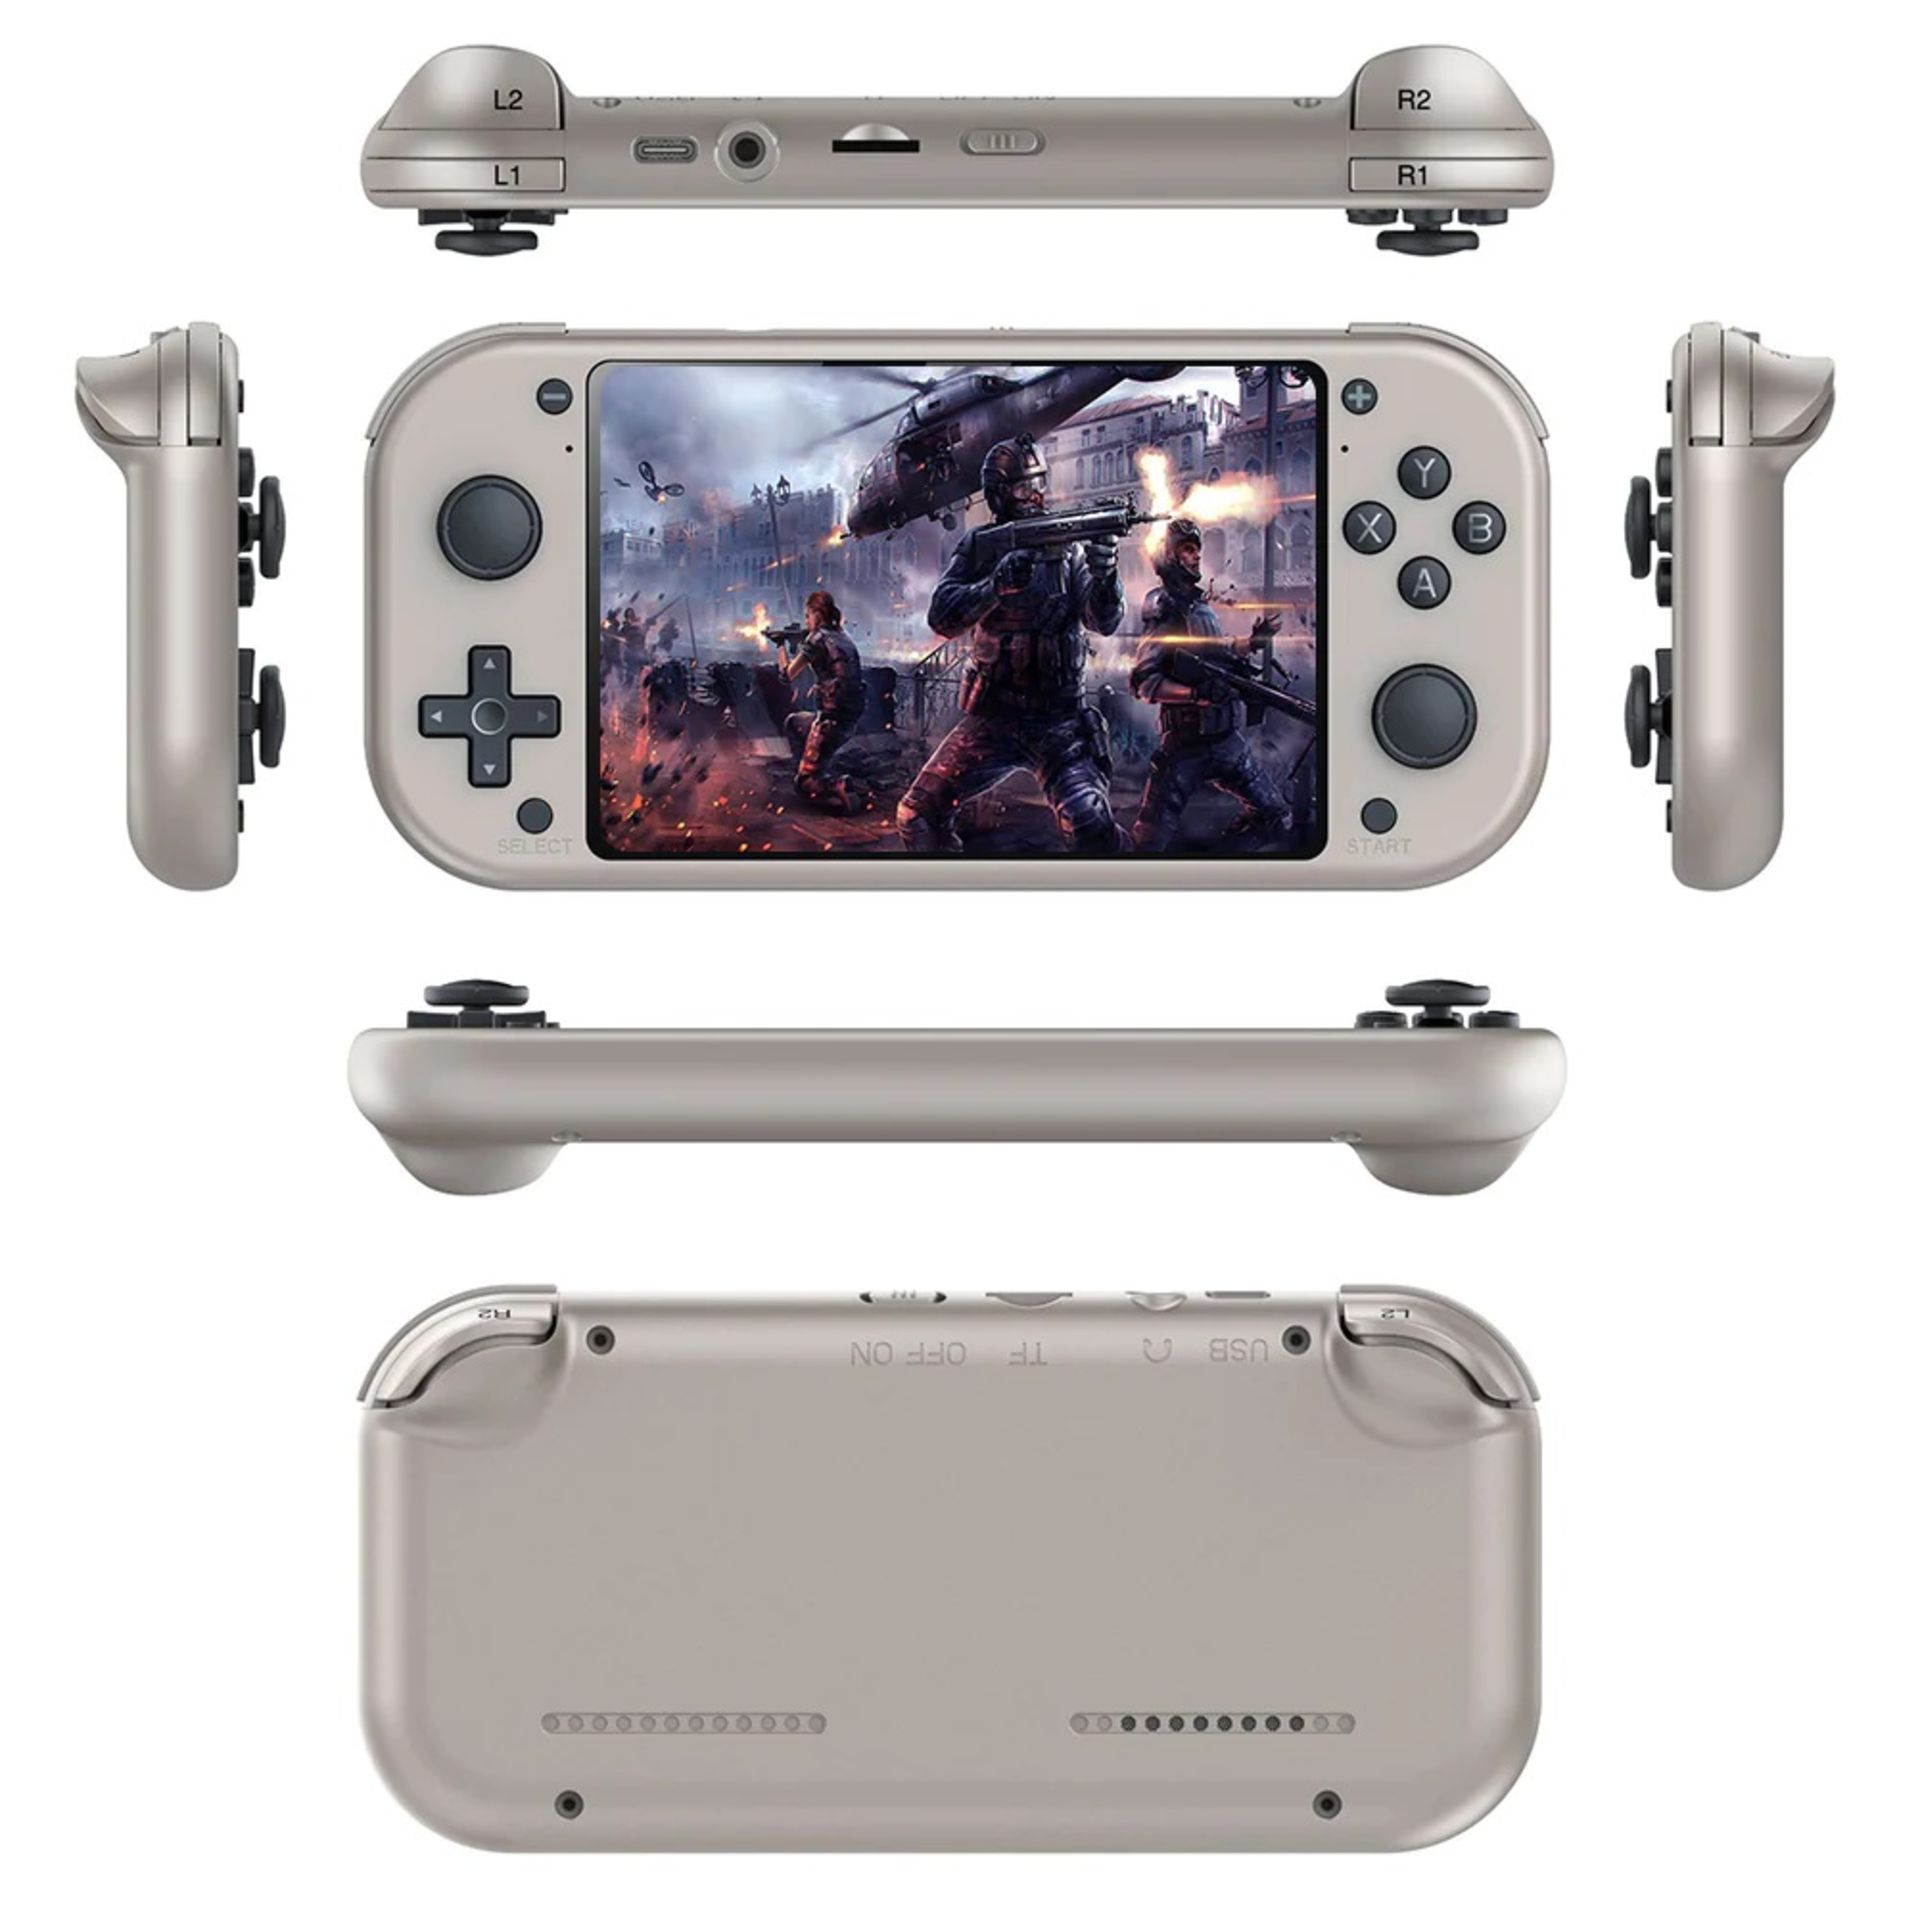 1 x Handheld 4.3" Quad Core Games Console With Over 20 Retro Games Systems and 30,000 Games! - Image 16 of 36